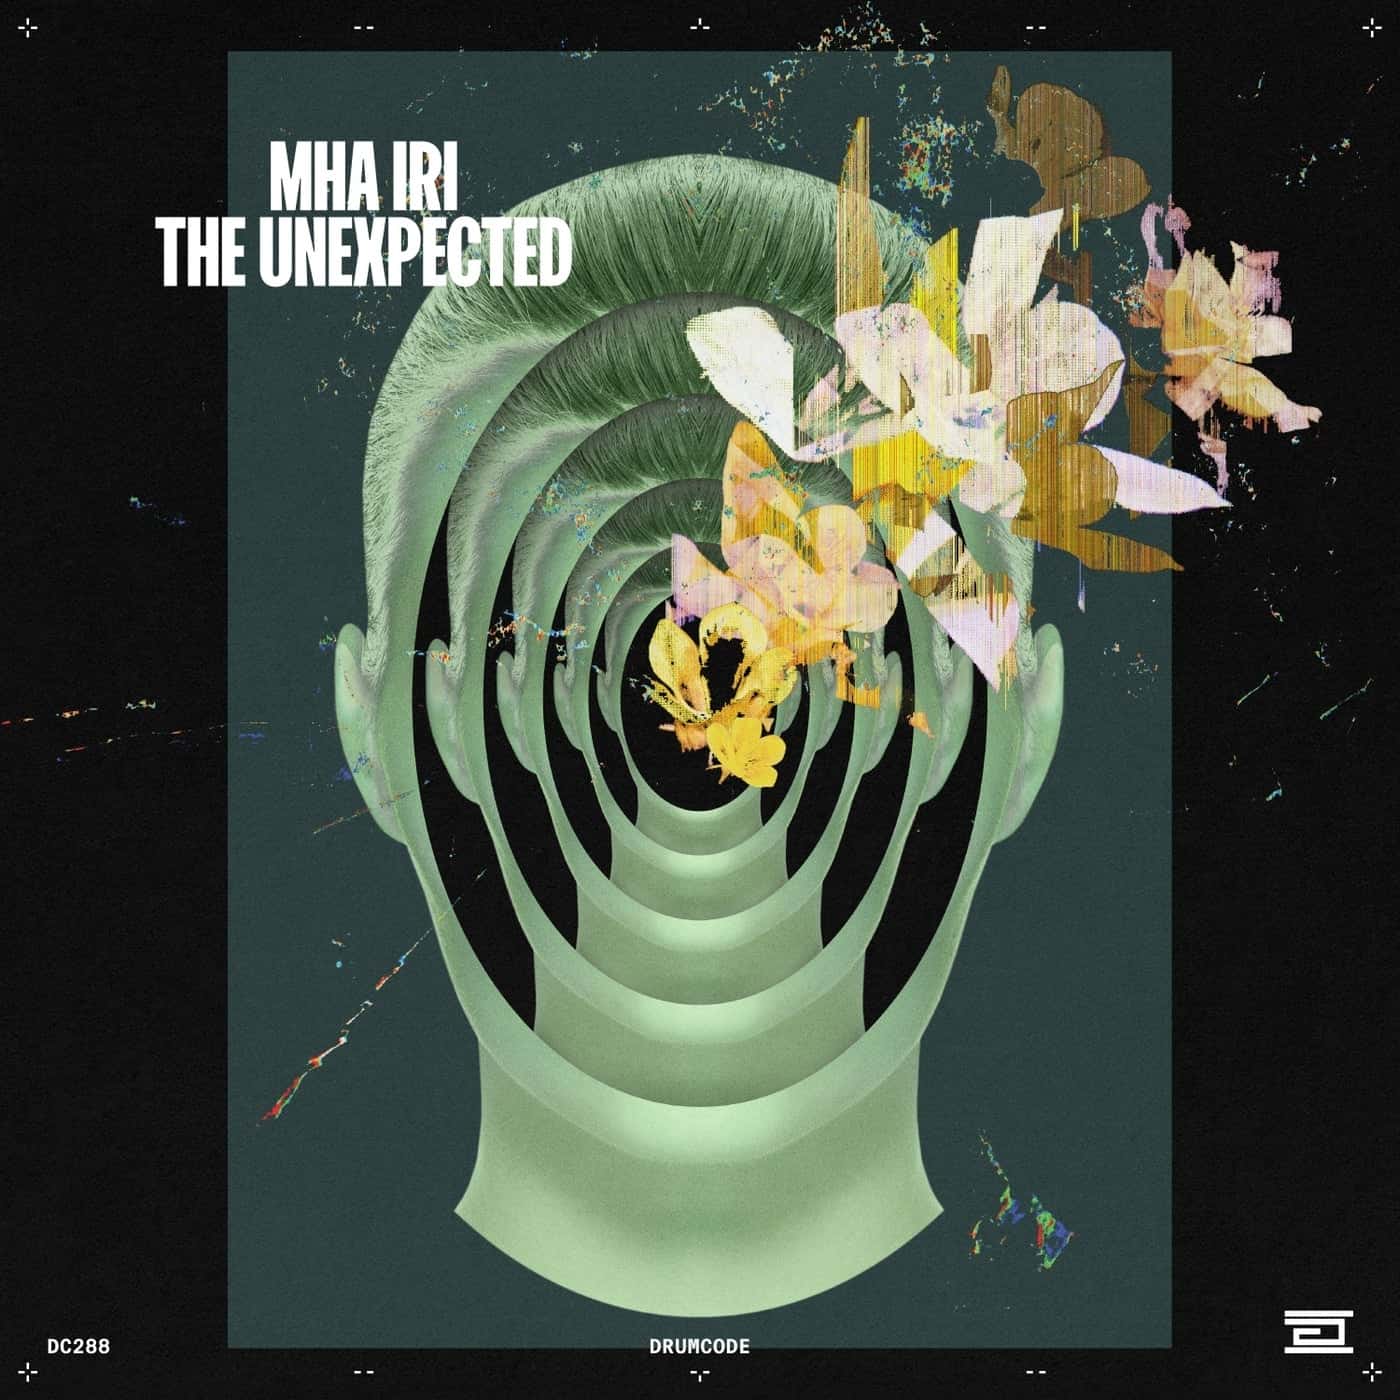 image cover: Mha Iri - The Unexpected by Drumcode